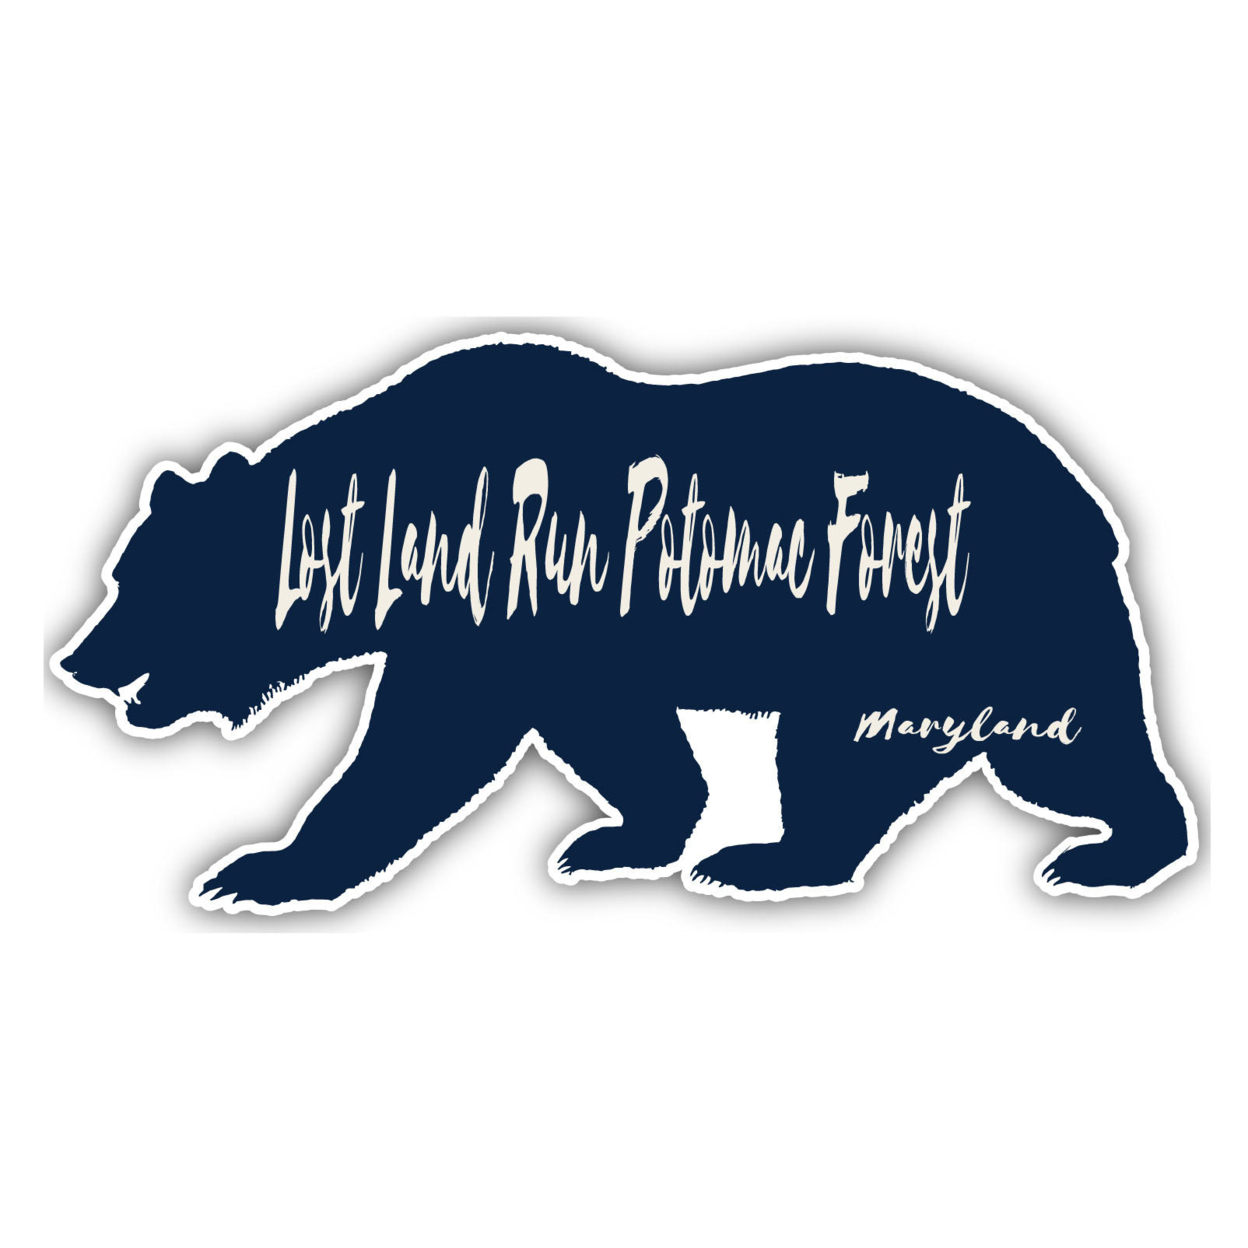 Lost Land Run Potomac Forest Maryland Souvenir Decorative Stickers (Choose Theme And Size) - 2-Inch, Bear